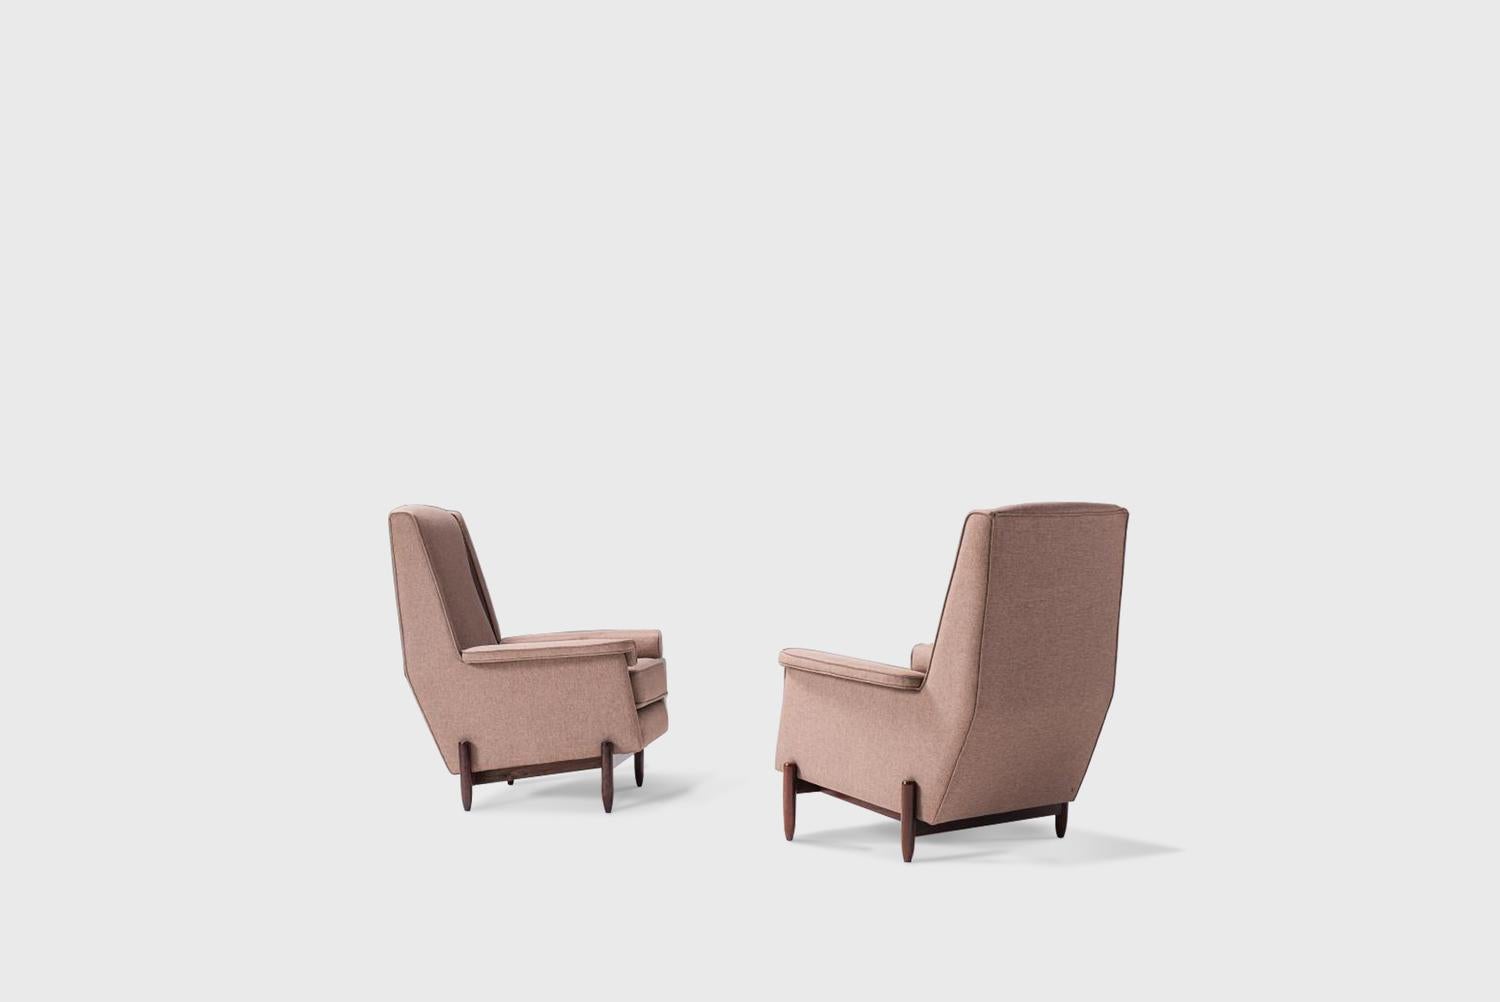 Pair of Armchairs Manufactured by Móveis Cantu Brazil, 1960s 
Structures executed in solid jacaranda, upholstered bodies and seats covered in grey fabric
Measurements : 74cmx 80cmx99hcm 29,2 in x 31,5 in x 39 h in